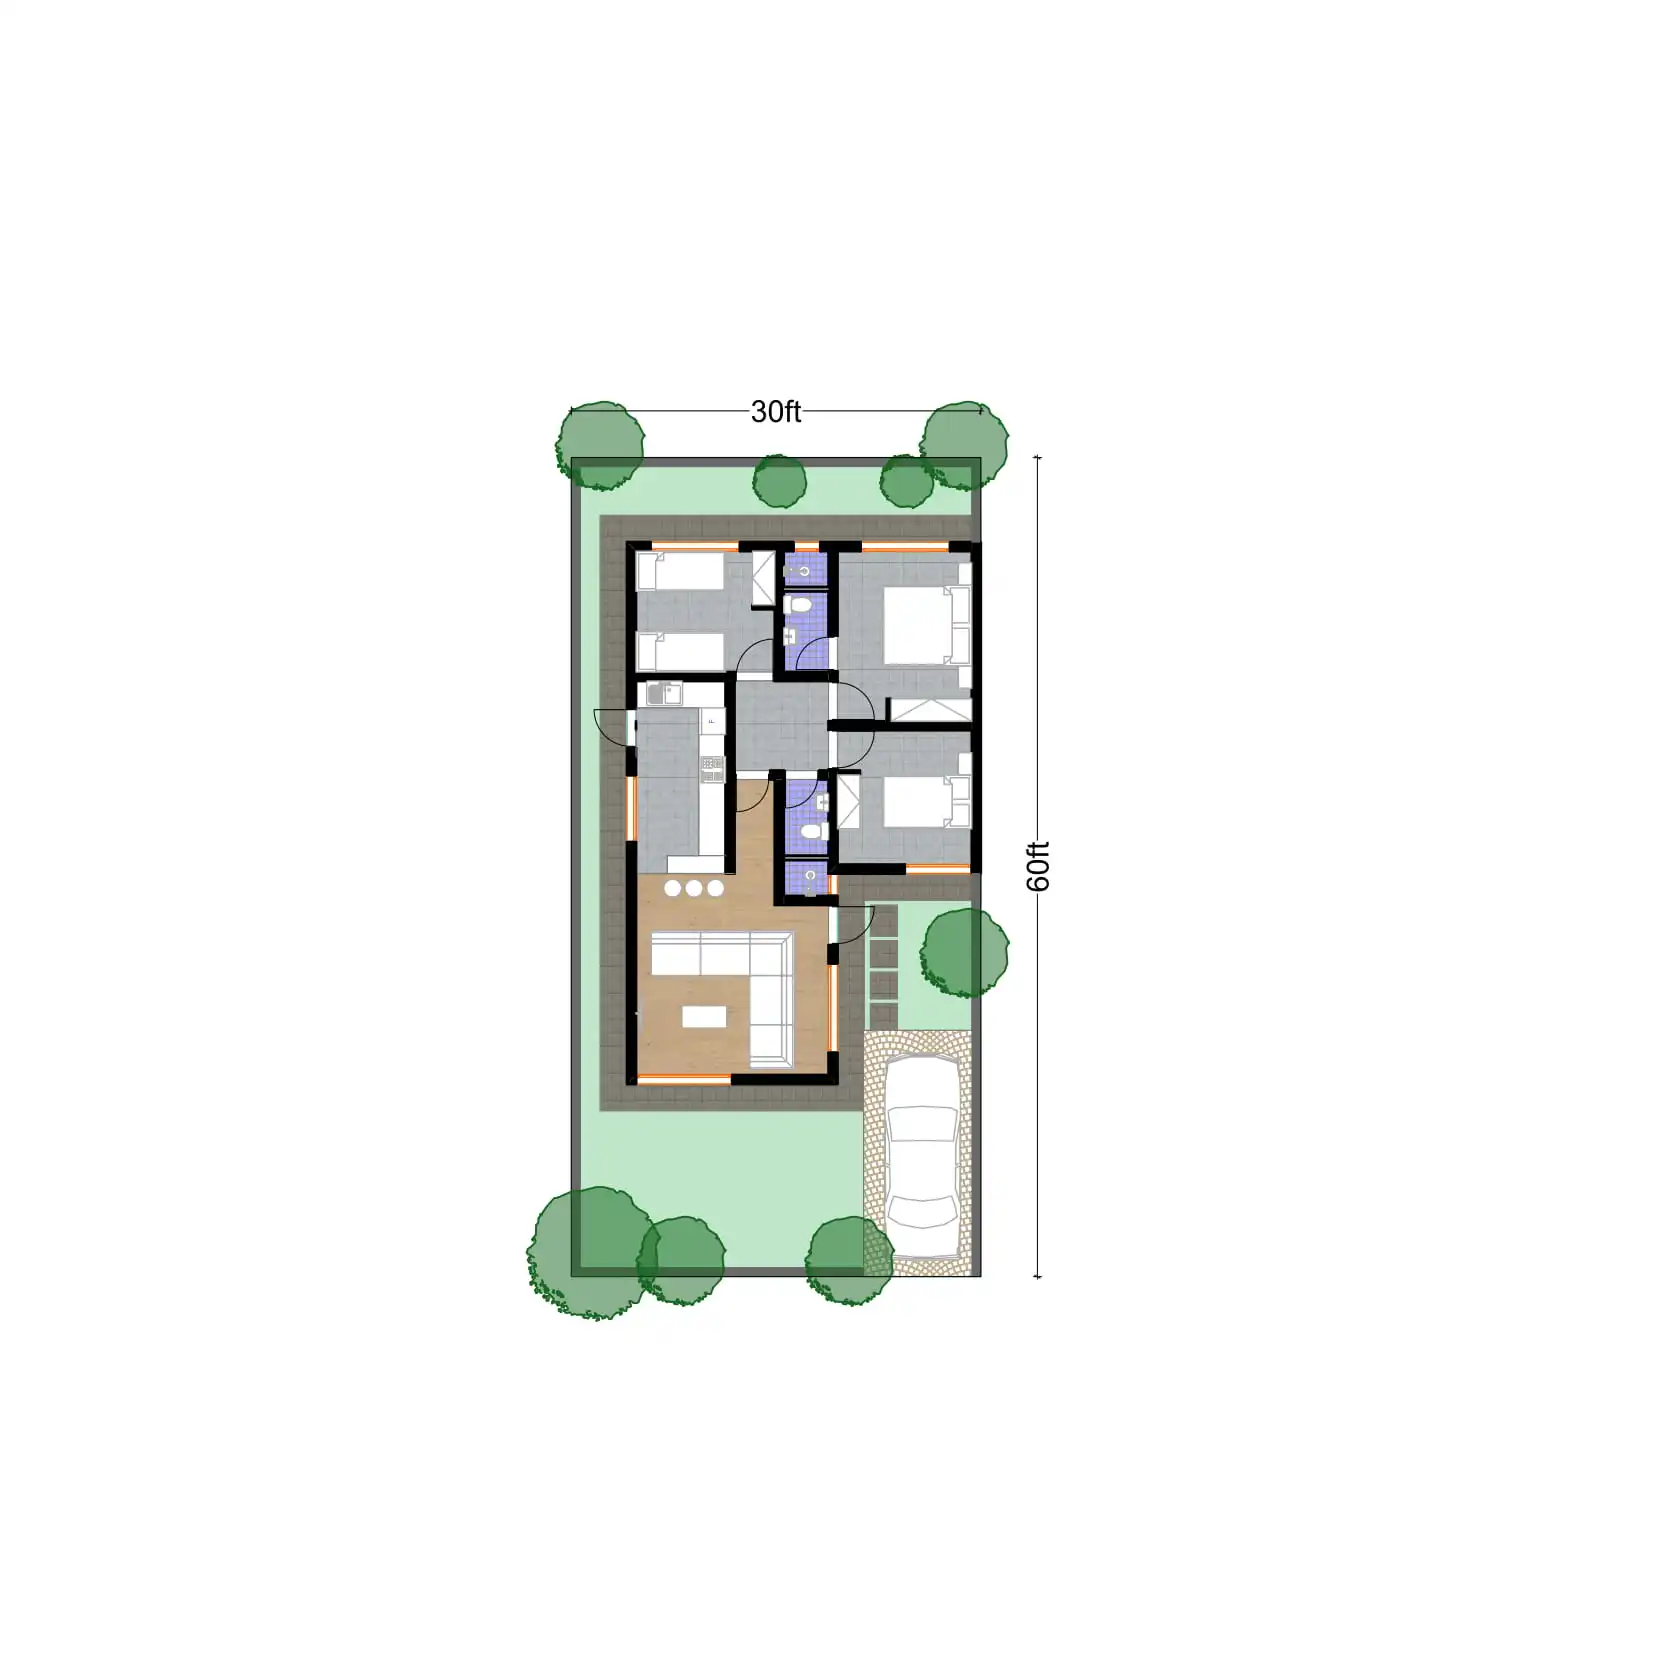 3 Bedroom Bungalow - ID 31171 - 31171 - 30X60-1.jpg from Inuua Tujenge house plans with 3 bedrooms and 2 bathrooms. ( bungalow )